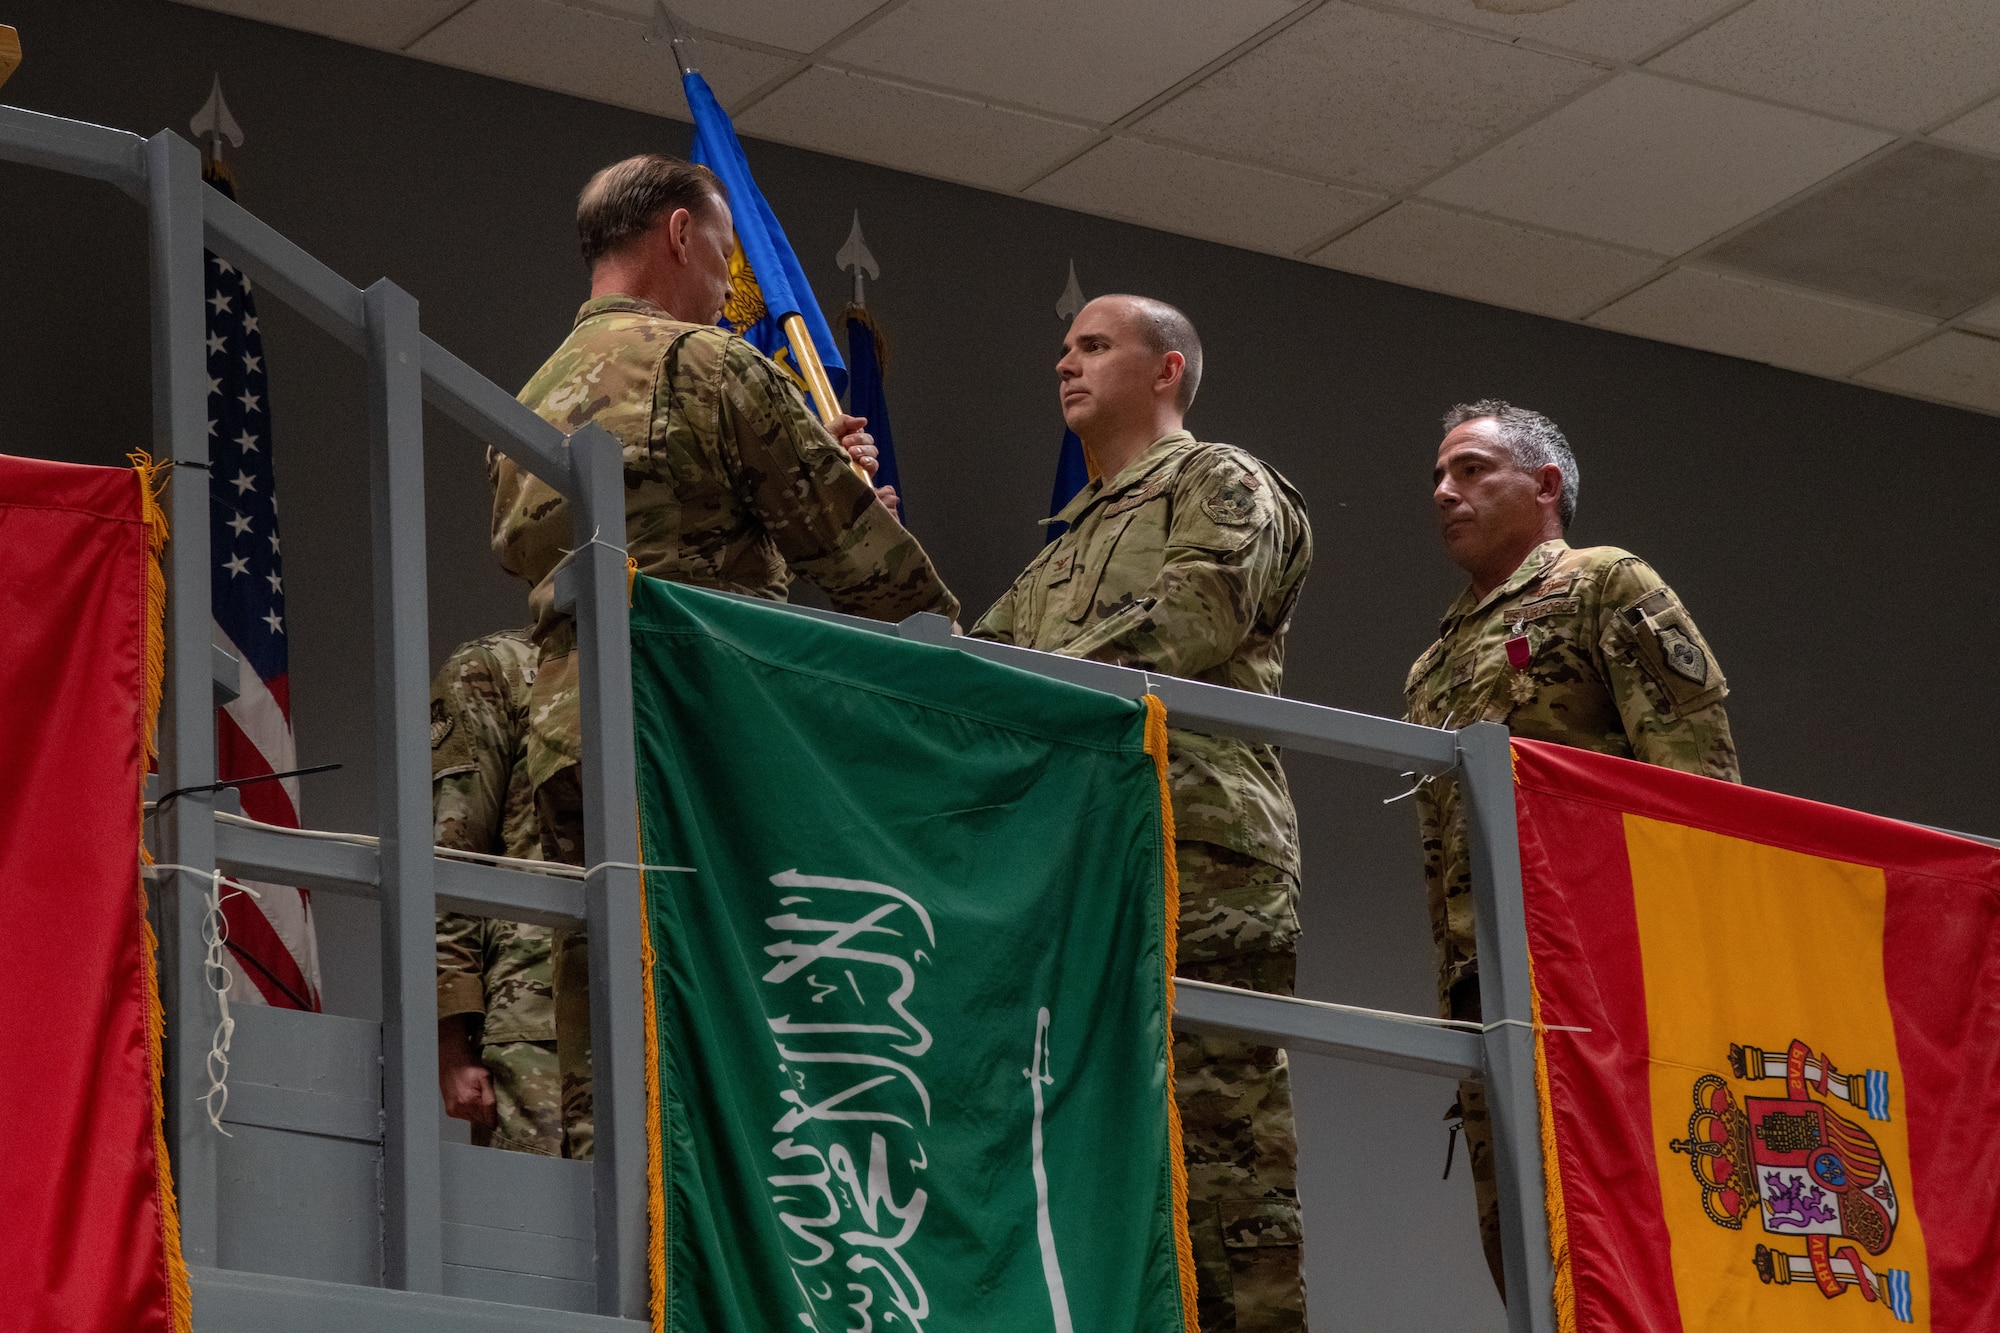 U.S. Air Force Maj. Gen. David Meyer, Deputy Commander, Ninth Air Force (Air Forces Central), presents the unit flag to U.S. Air Force Col. Kevin M. Ogle, as he assumes command of the 609th Air Operations Center, during the unit’s change of command ceremony at the Combined Air Operations Center at Al Udeid Air Base, Qatar, May 25, 2022. At the ceremony, U.S. Air Force Col. Joshua Koslov relinquished command of the 609th AOC to U.S. Air Force Col. Kevin M. Ogle. Ogle closed the ceremony with his vision for the future of the AOC, which included his desire to continue posturing to prevail tomorrow, deter regional aggressors, and the forge of resolute partnerships across the AFCENT area of responsibility. (U.S. Air Force photo by Senior Airman Dominic Tyler)